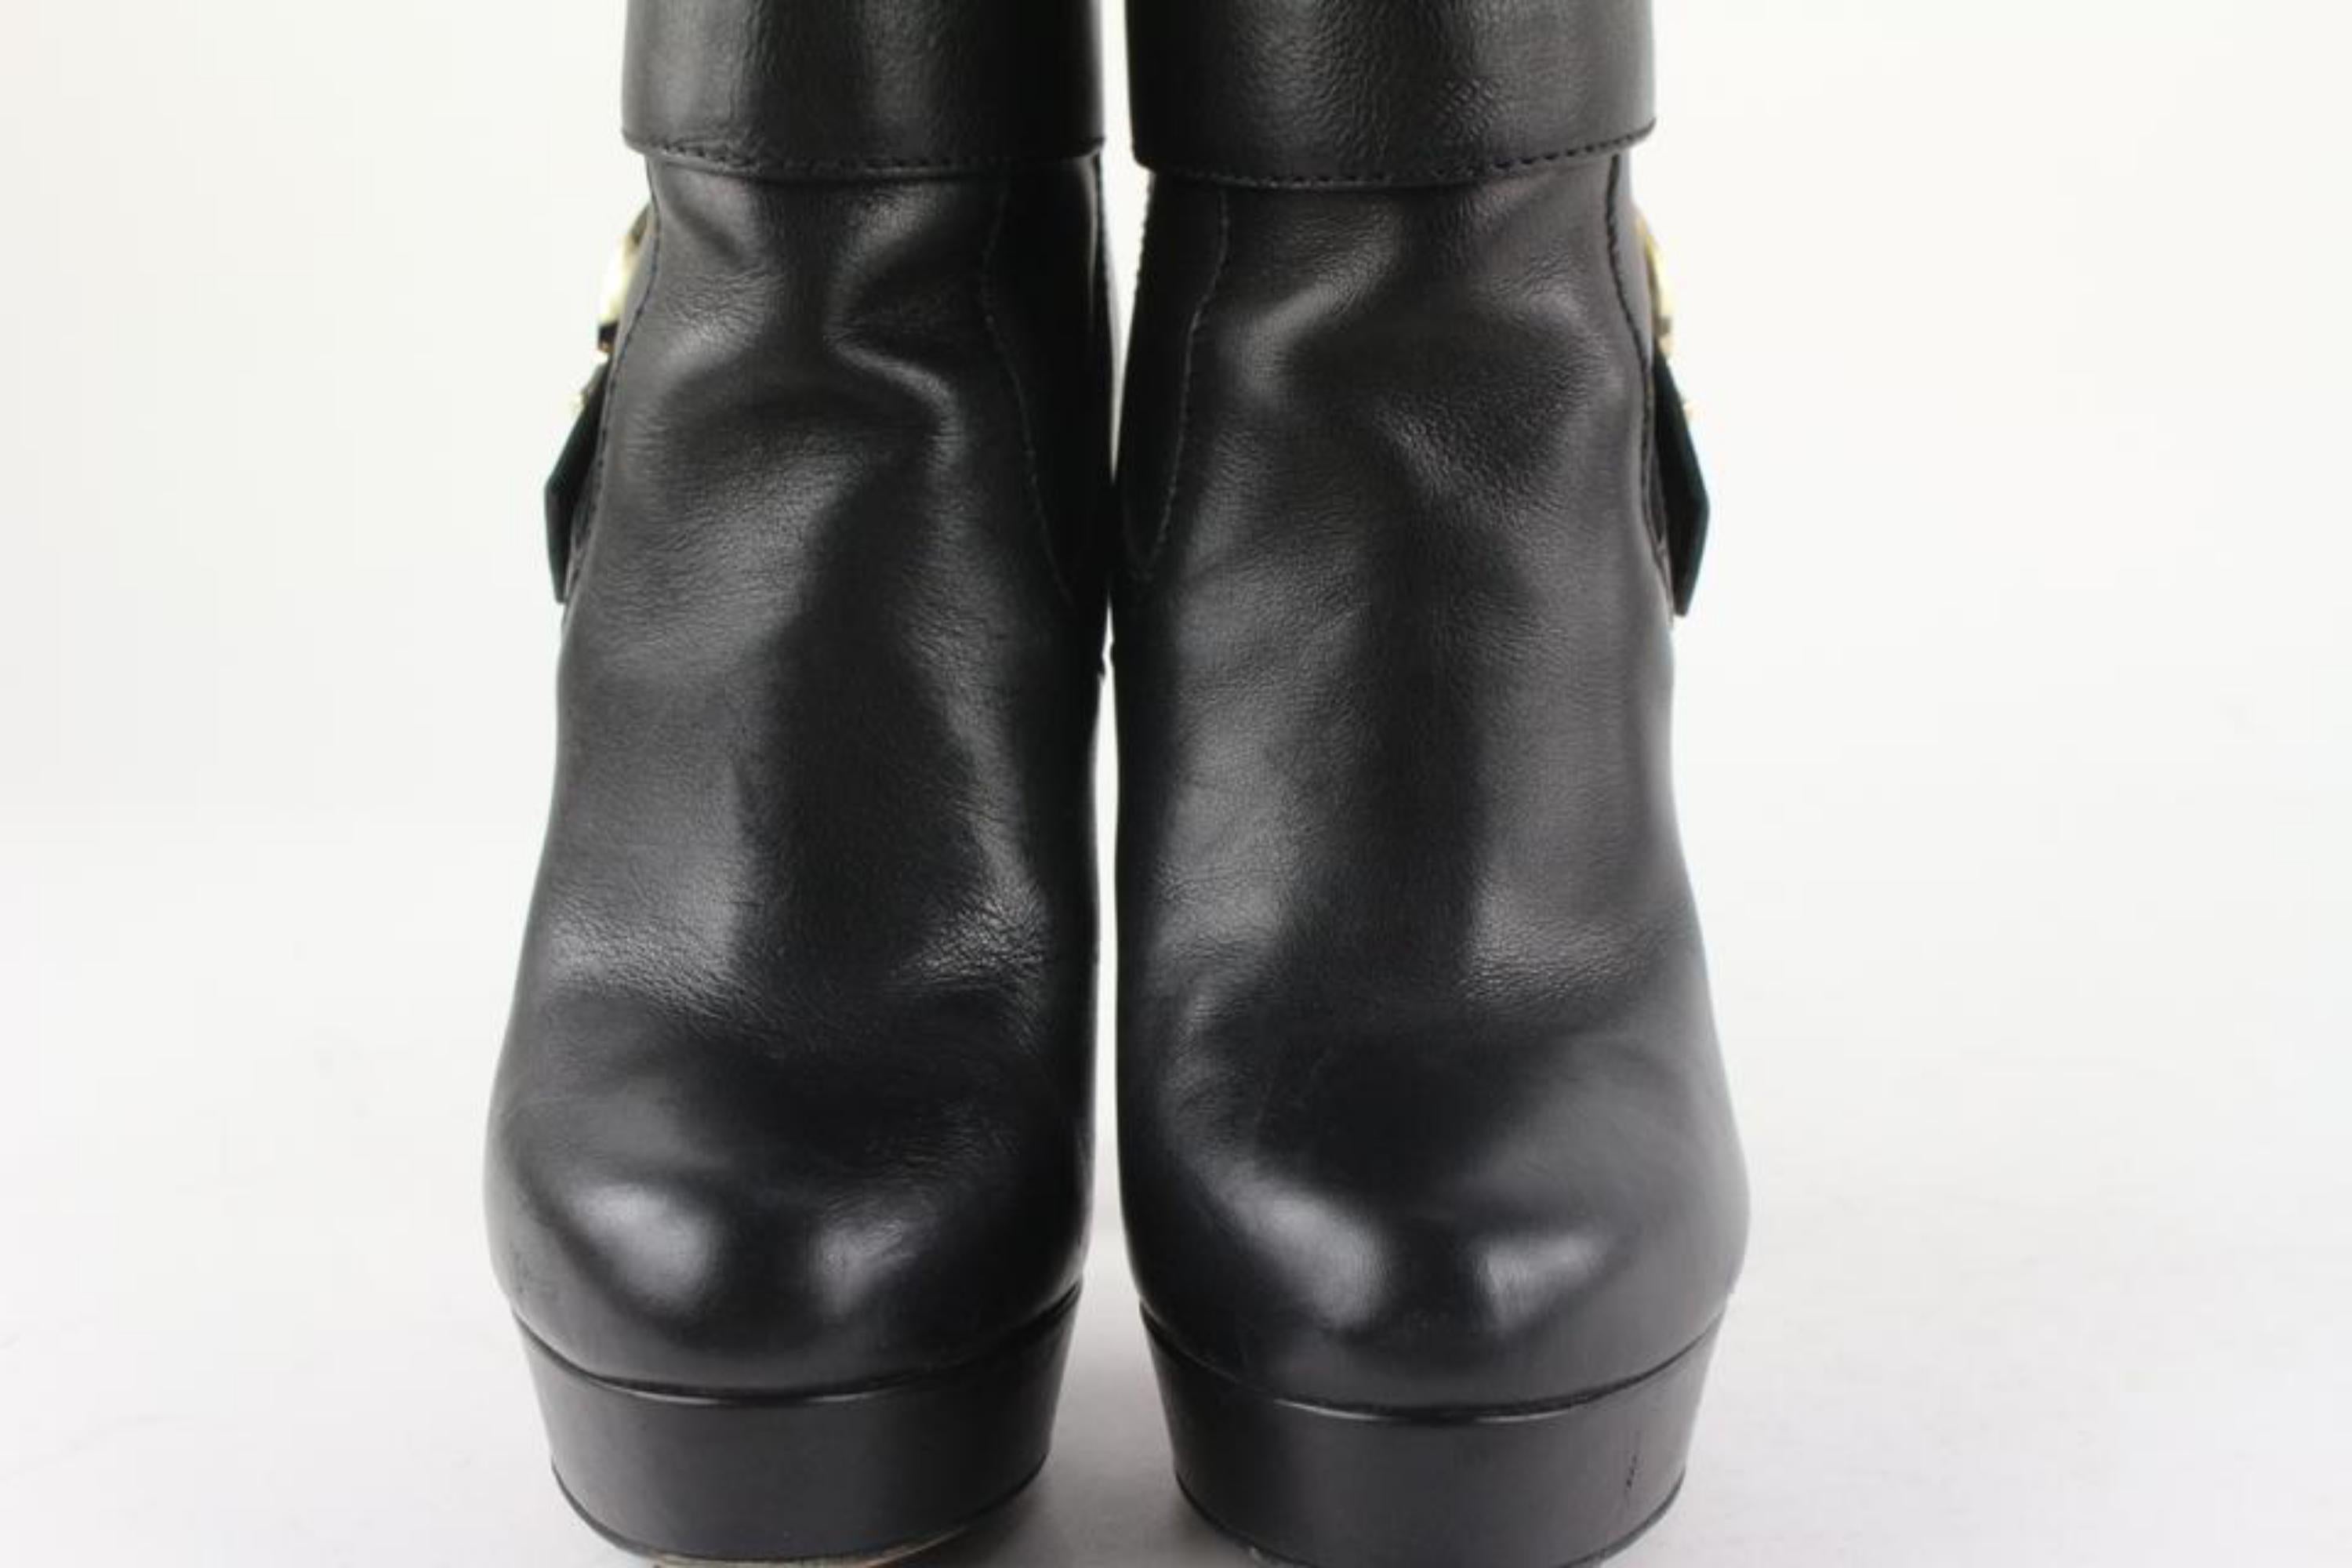 Gucci Women's 35.5 Black Leather Horsebit Boots 1gg1105 For Sale 2